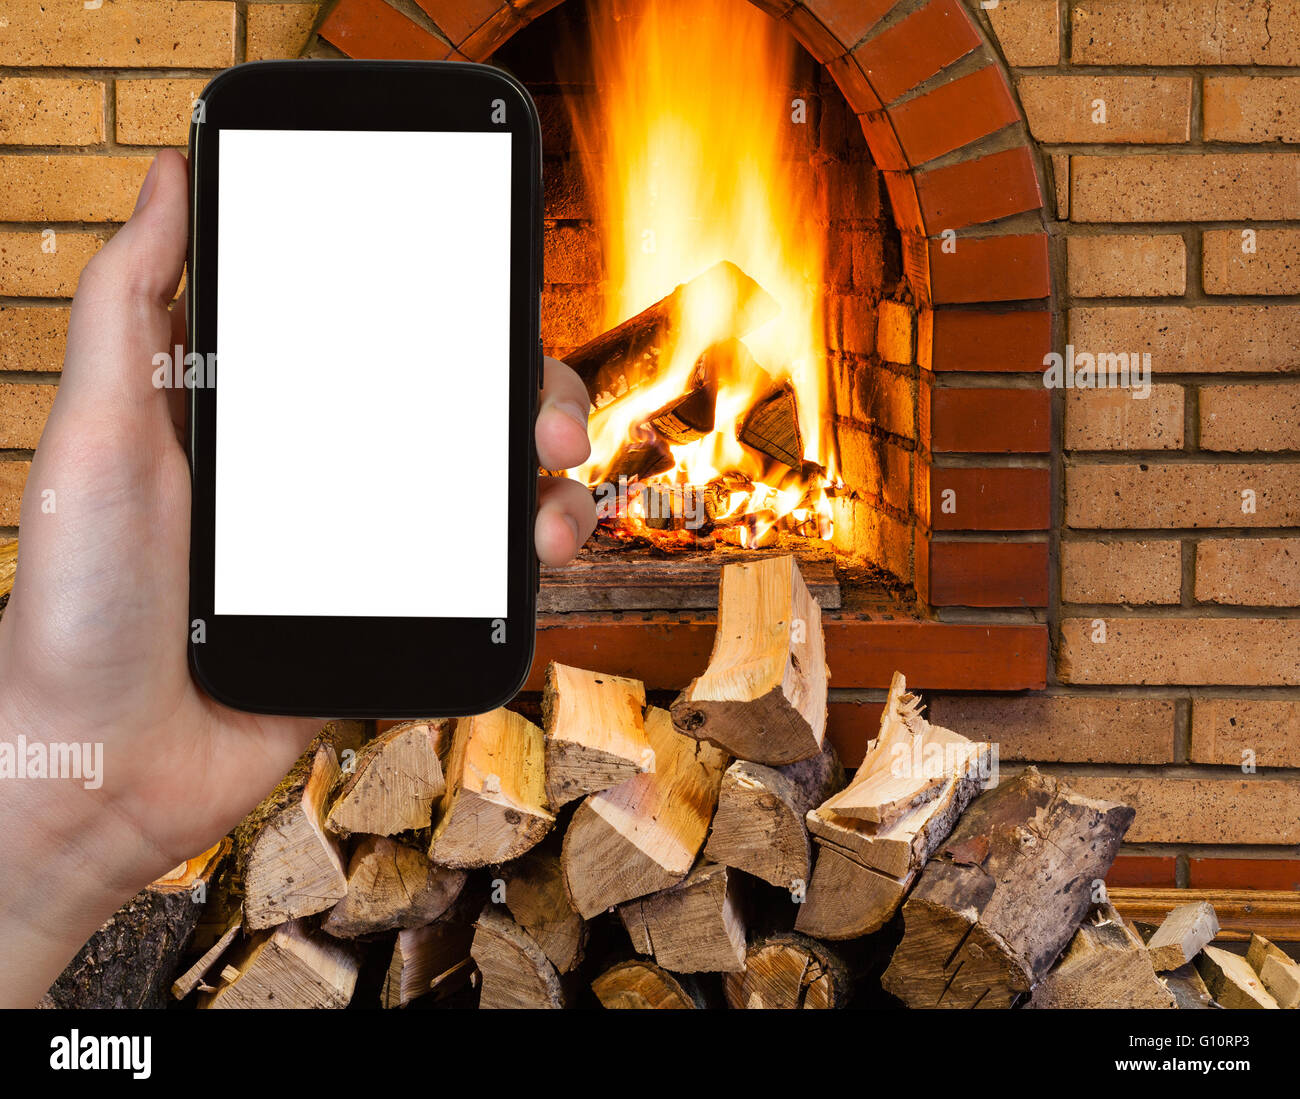 comfortable holiday concept - tourist photographs fireplace on smartphone with cut out screen with blank place for advertising Stock Photo